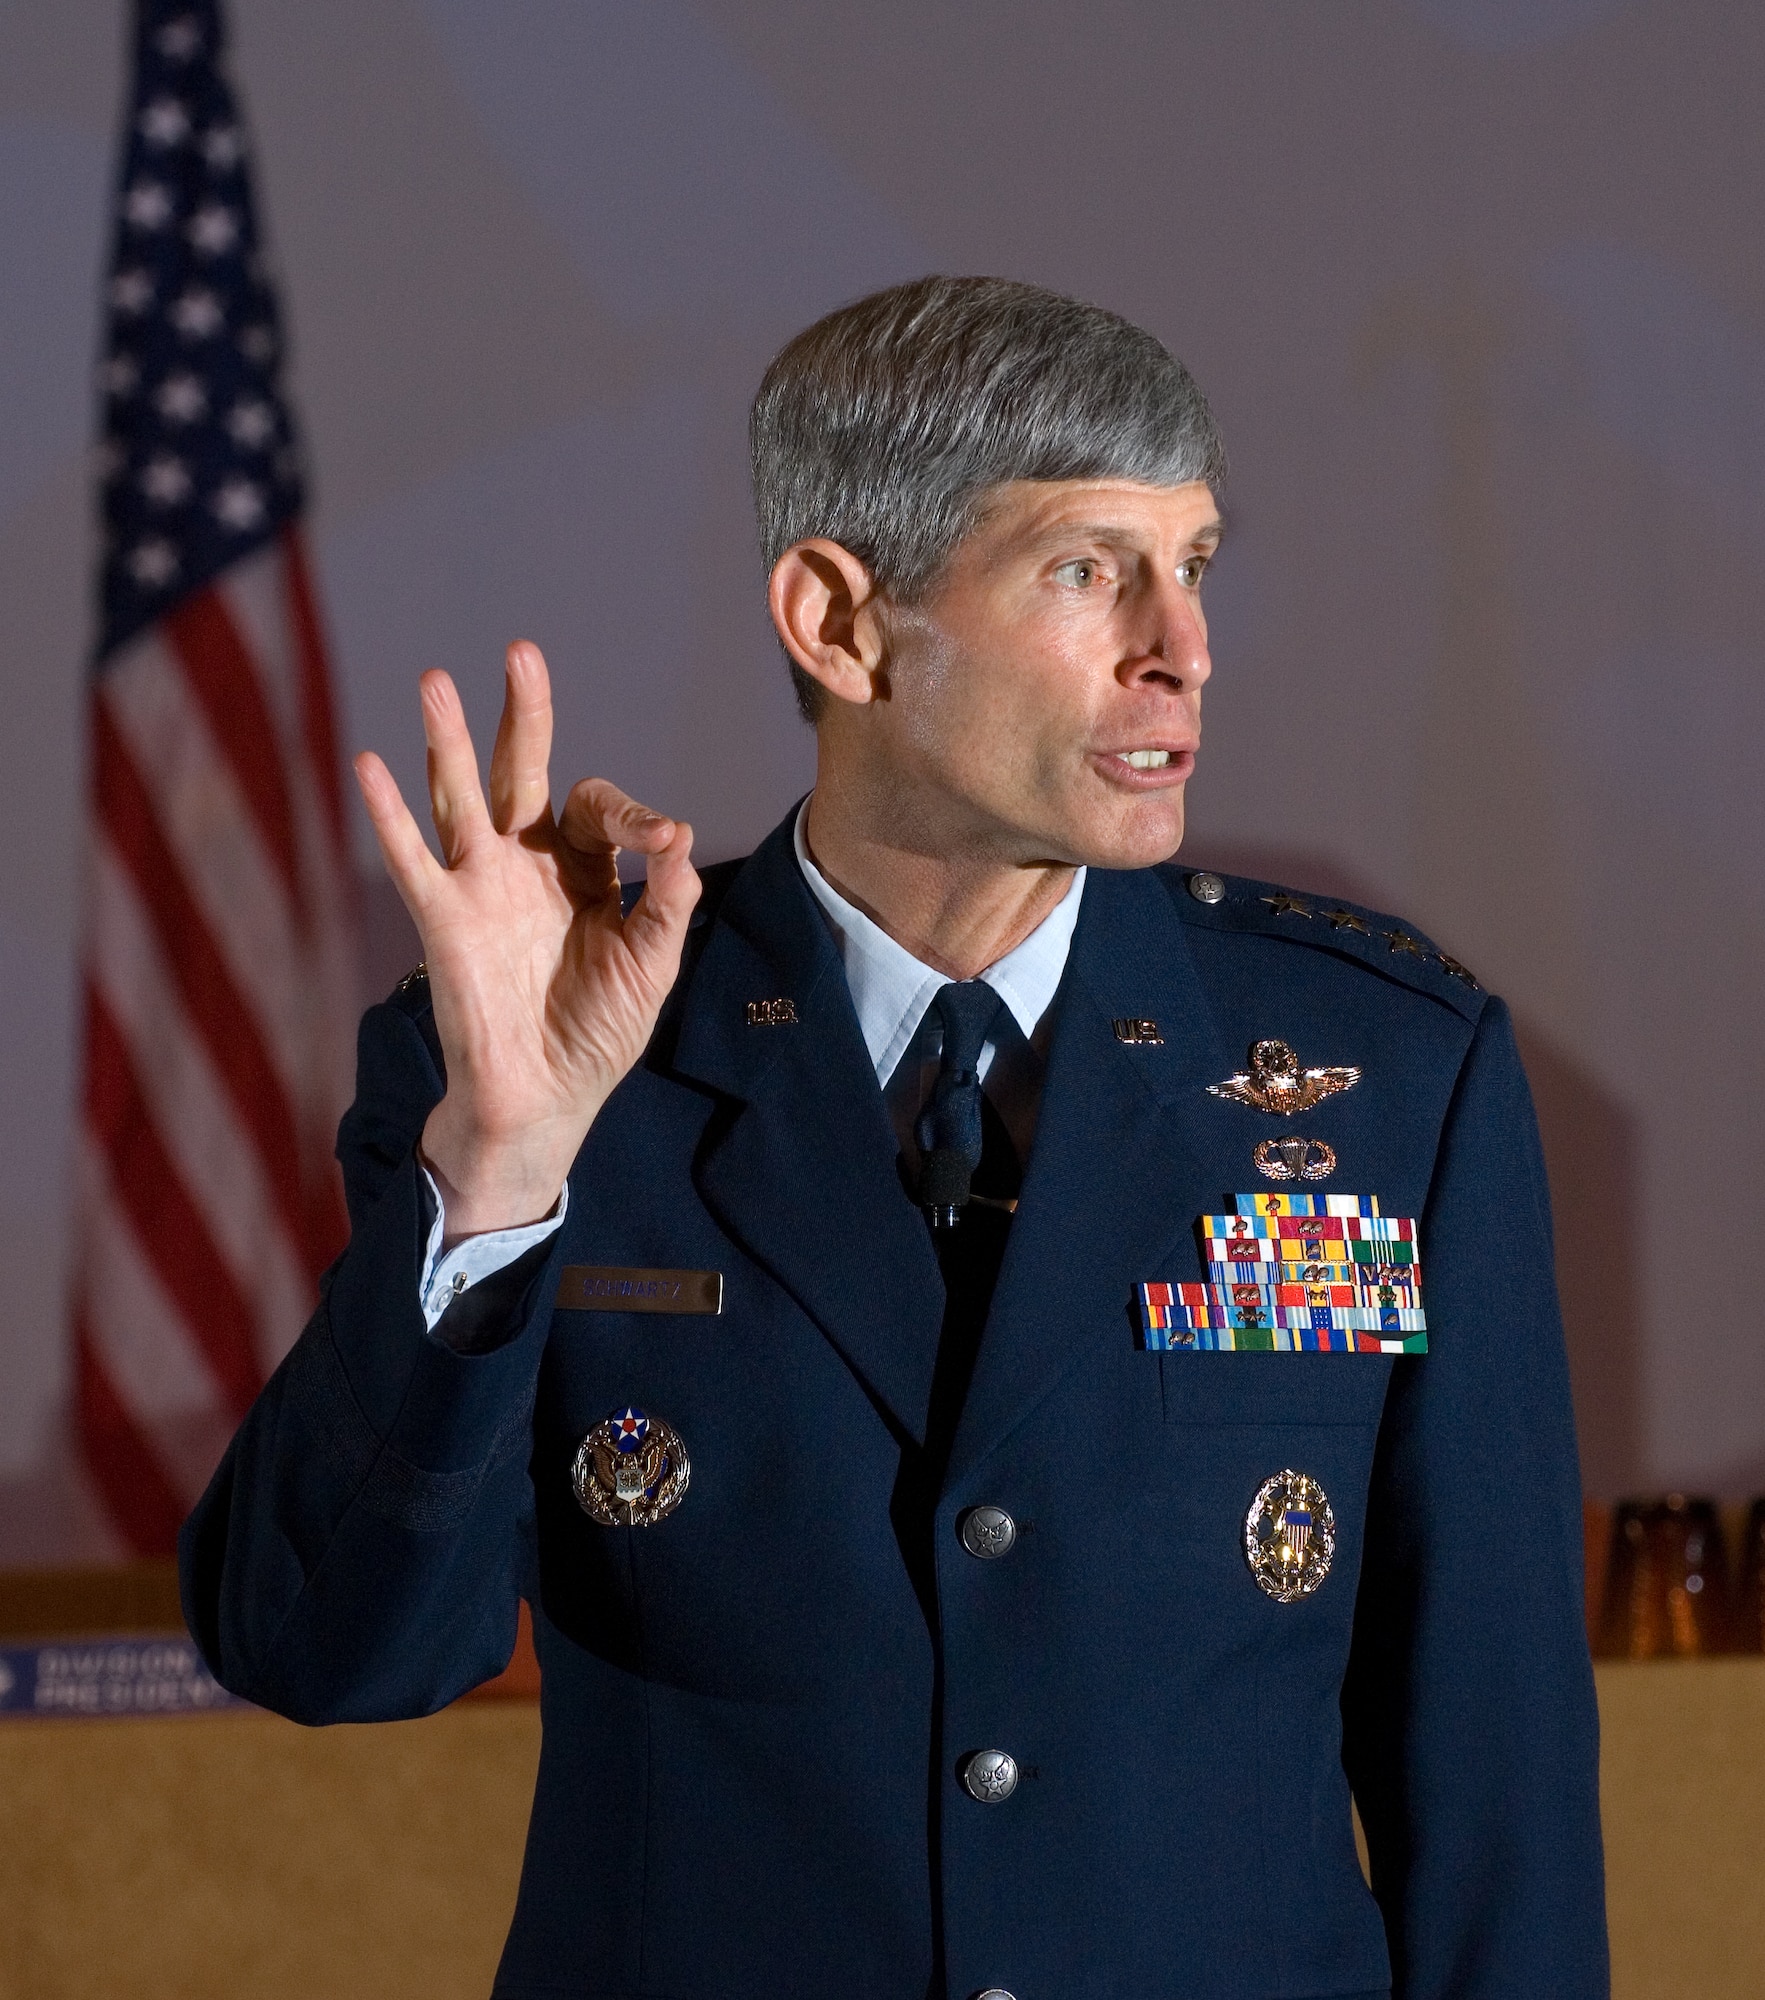 Gen. Norton Schwartz, Air Force chief of staff, talks about his objectives to remedy problems in today's Air Force during his keynote speech Aug. 25 at the Air Force Sergeants Association's annual Professional Airmen's Conference and International Convention in San Antonio. (U.S. Air Force photo/Lance Cheung)